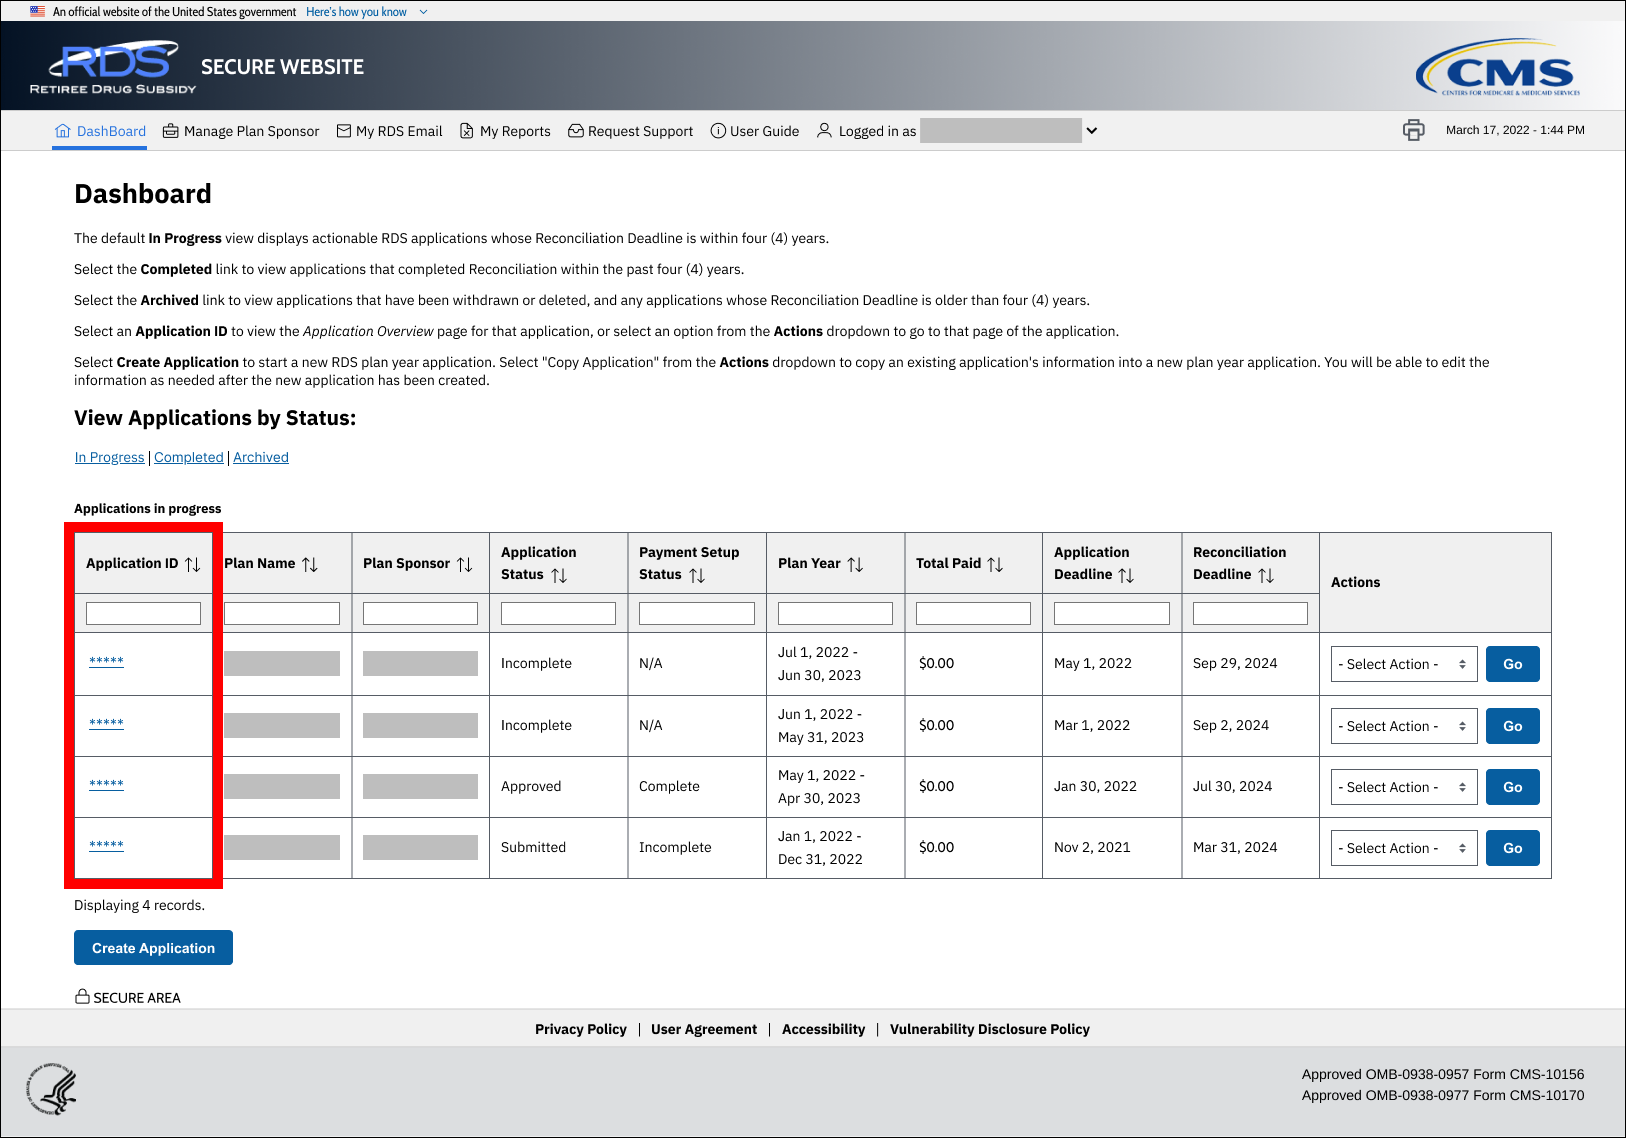 Dashboard page with sample data. Application ID column of Applications in progress table is highlighted.